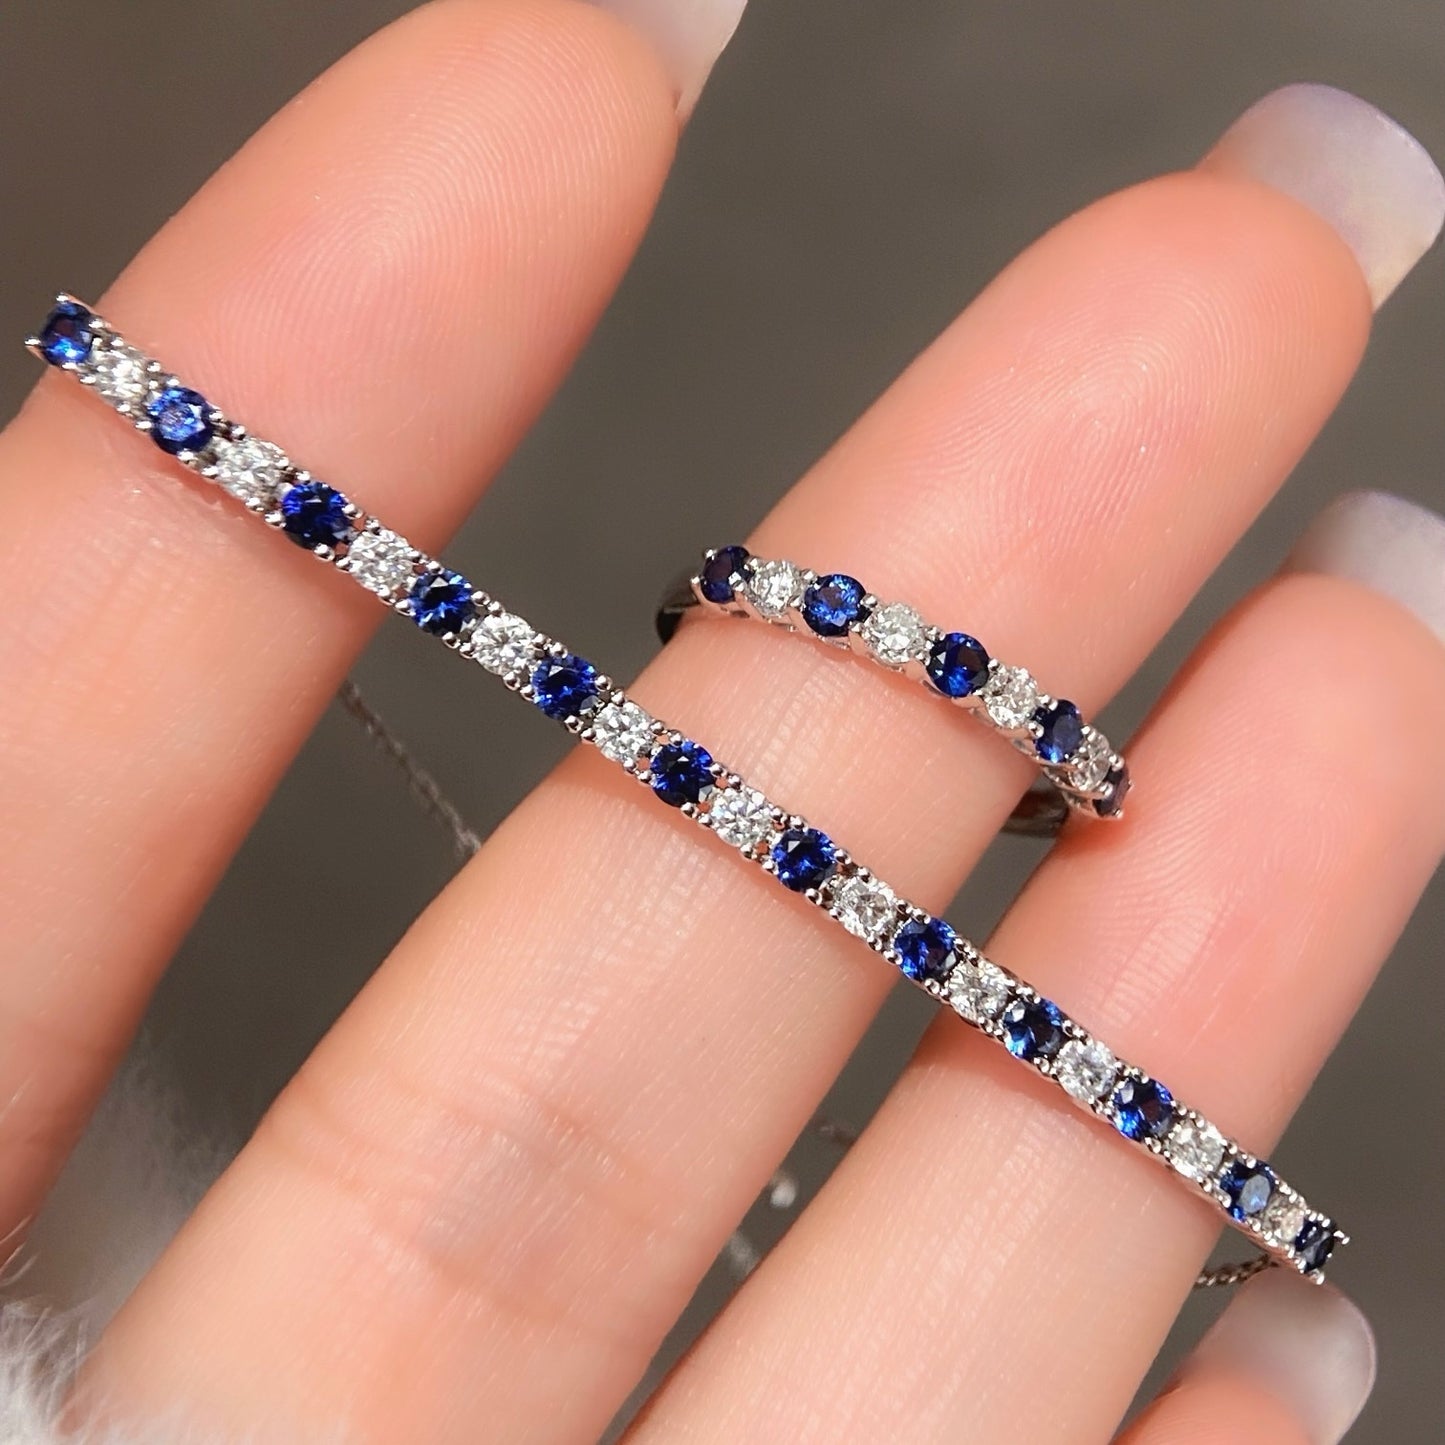 Natural Ruby / Sapphire with Natural Diamond Rings / Bracelets in 18K White Gold